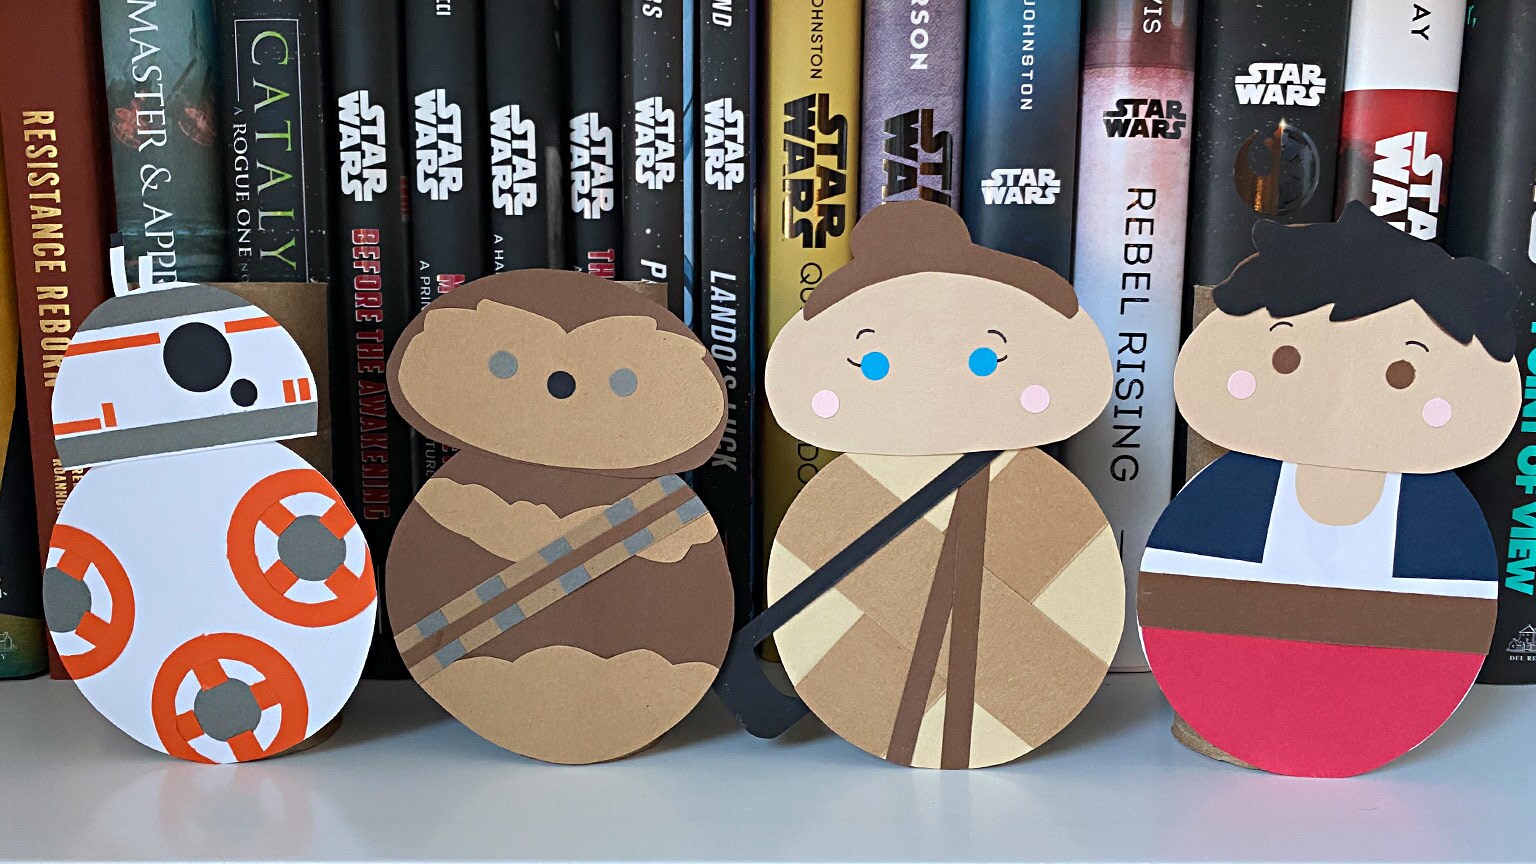 This Rebel Alliance String Art Binds the Galaxy Together